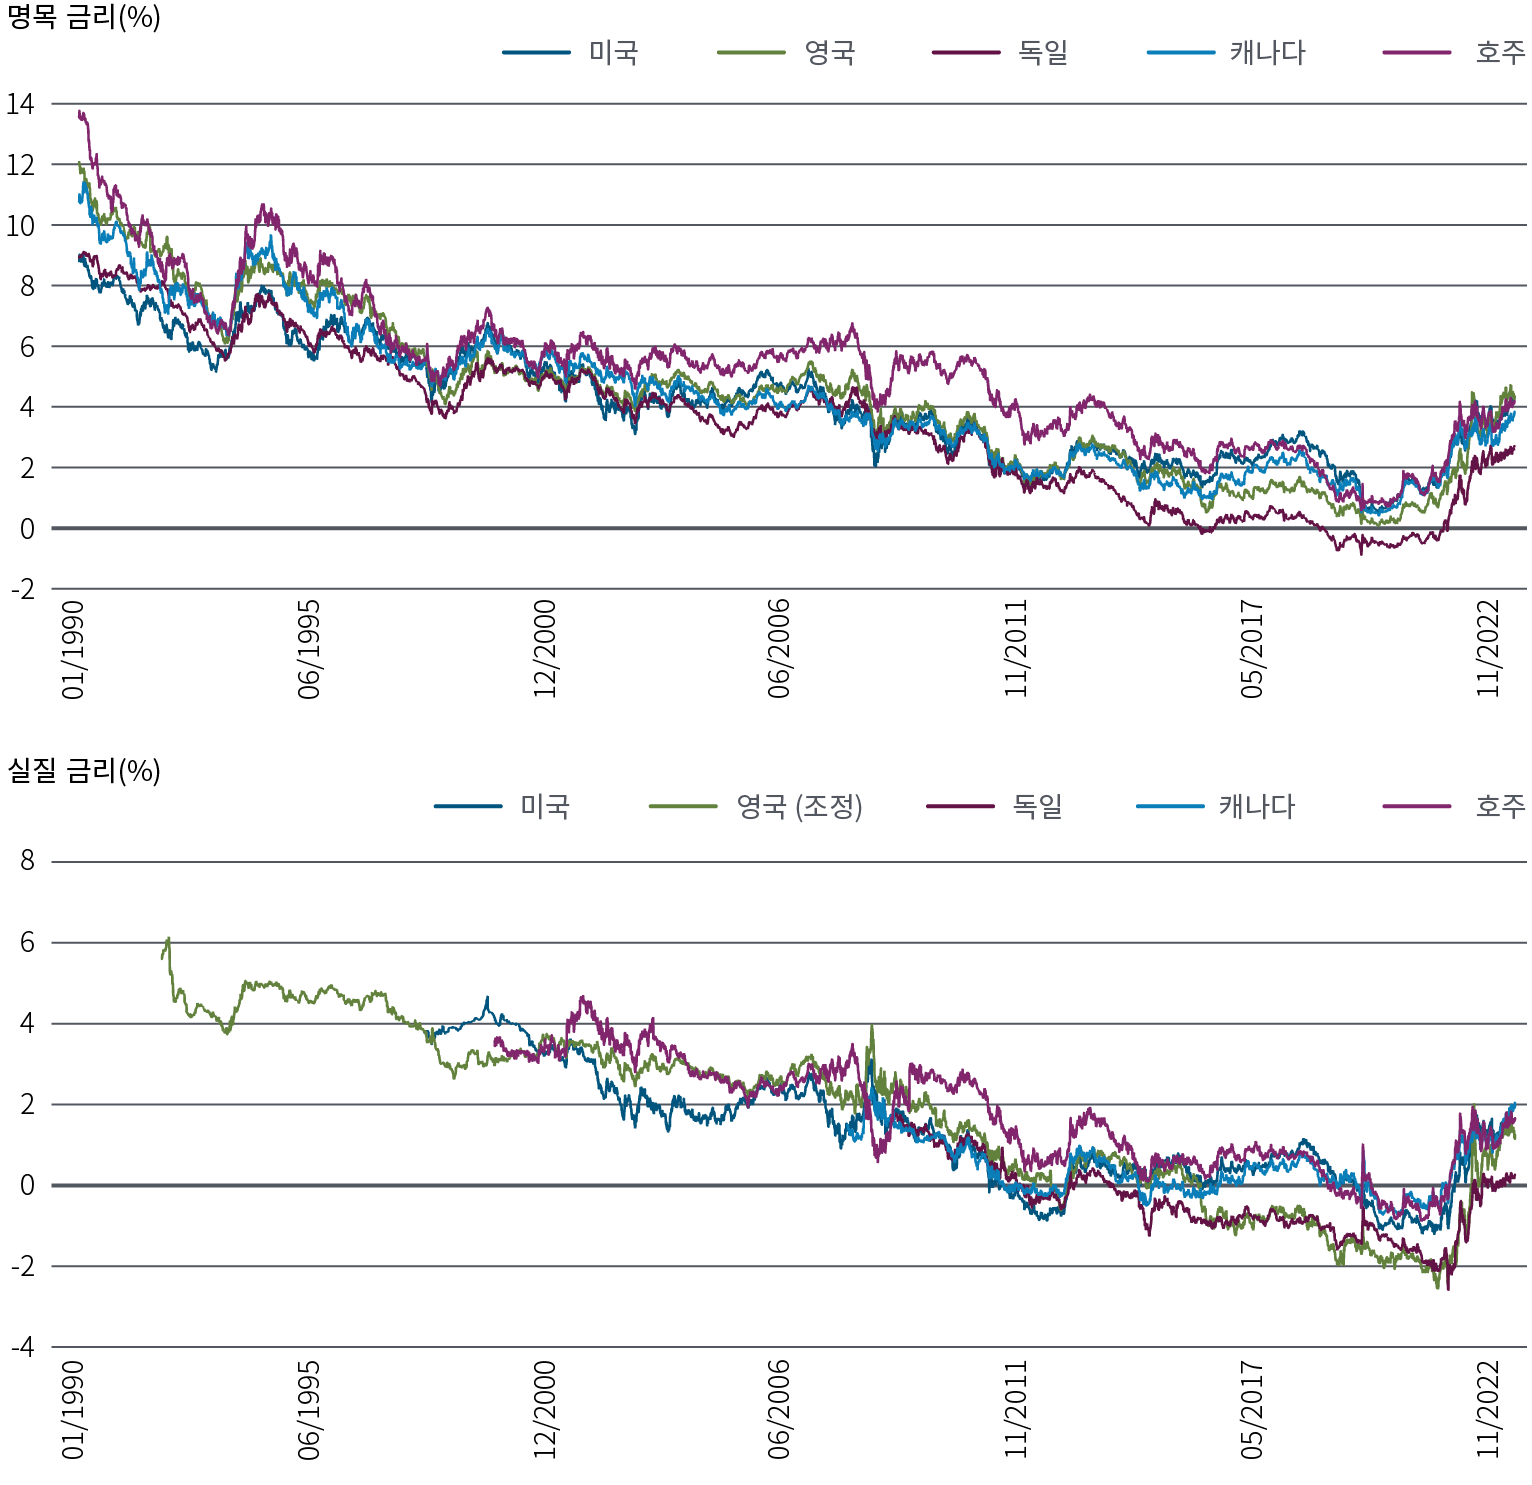 Figure 4 is two line charts. The first chart shows 10-year nominal interest rates in 5 developed market countries (U.S., U.K., Germany, Canada, and Australia) from 1990 through September 2023. In that time frame, nominal yields fluctuated some but along a downward trend from about 9%–14% in 1990 to a low hovering around zero in 2020, around the pandemic. They have since risen into a range from above 2% to above 4%. The second chart shows 10-year real rates for the same countries over the same time frame. Real rates generally and gradually dropped for much of that period, then rose rapidly following the pandemic, slowing those gains more recently but still off their lows and in a range of 0.5%–2.5%. Data source is PIMCO and Bloomberg as of 2 October 2023. 